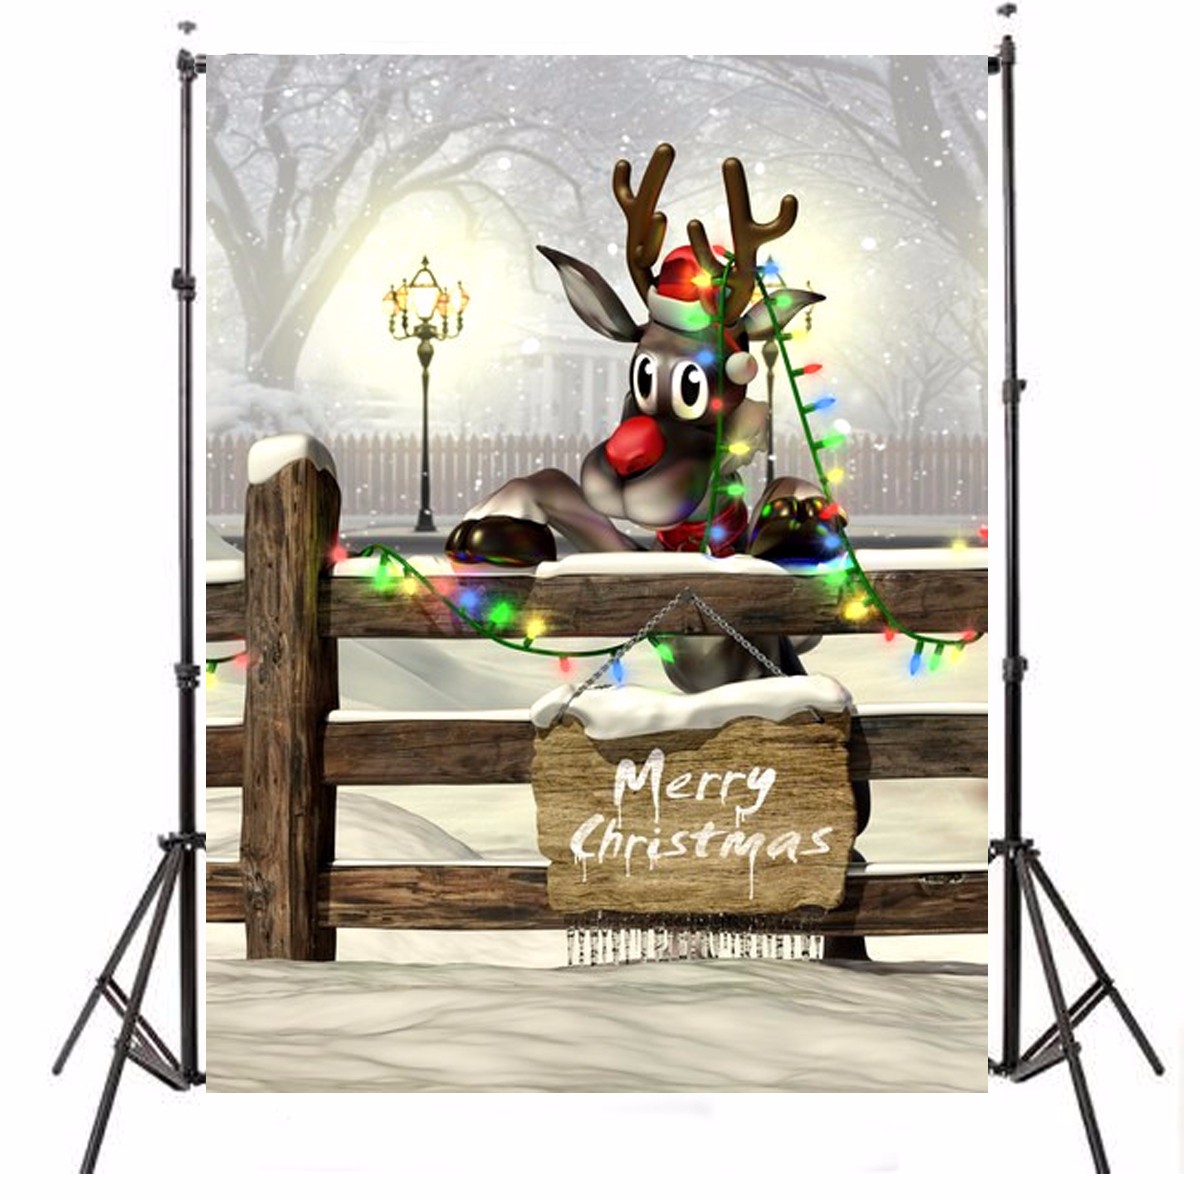 3x5FT-Silk-Christmas-Deer-Light-Thin-Photography-Studio-Backdrop-Photo-Background-Party-Props-1112422-2